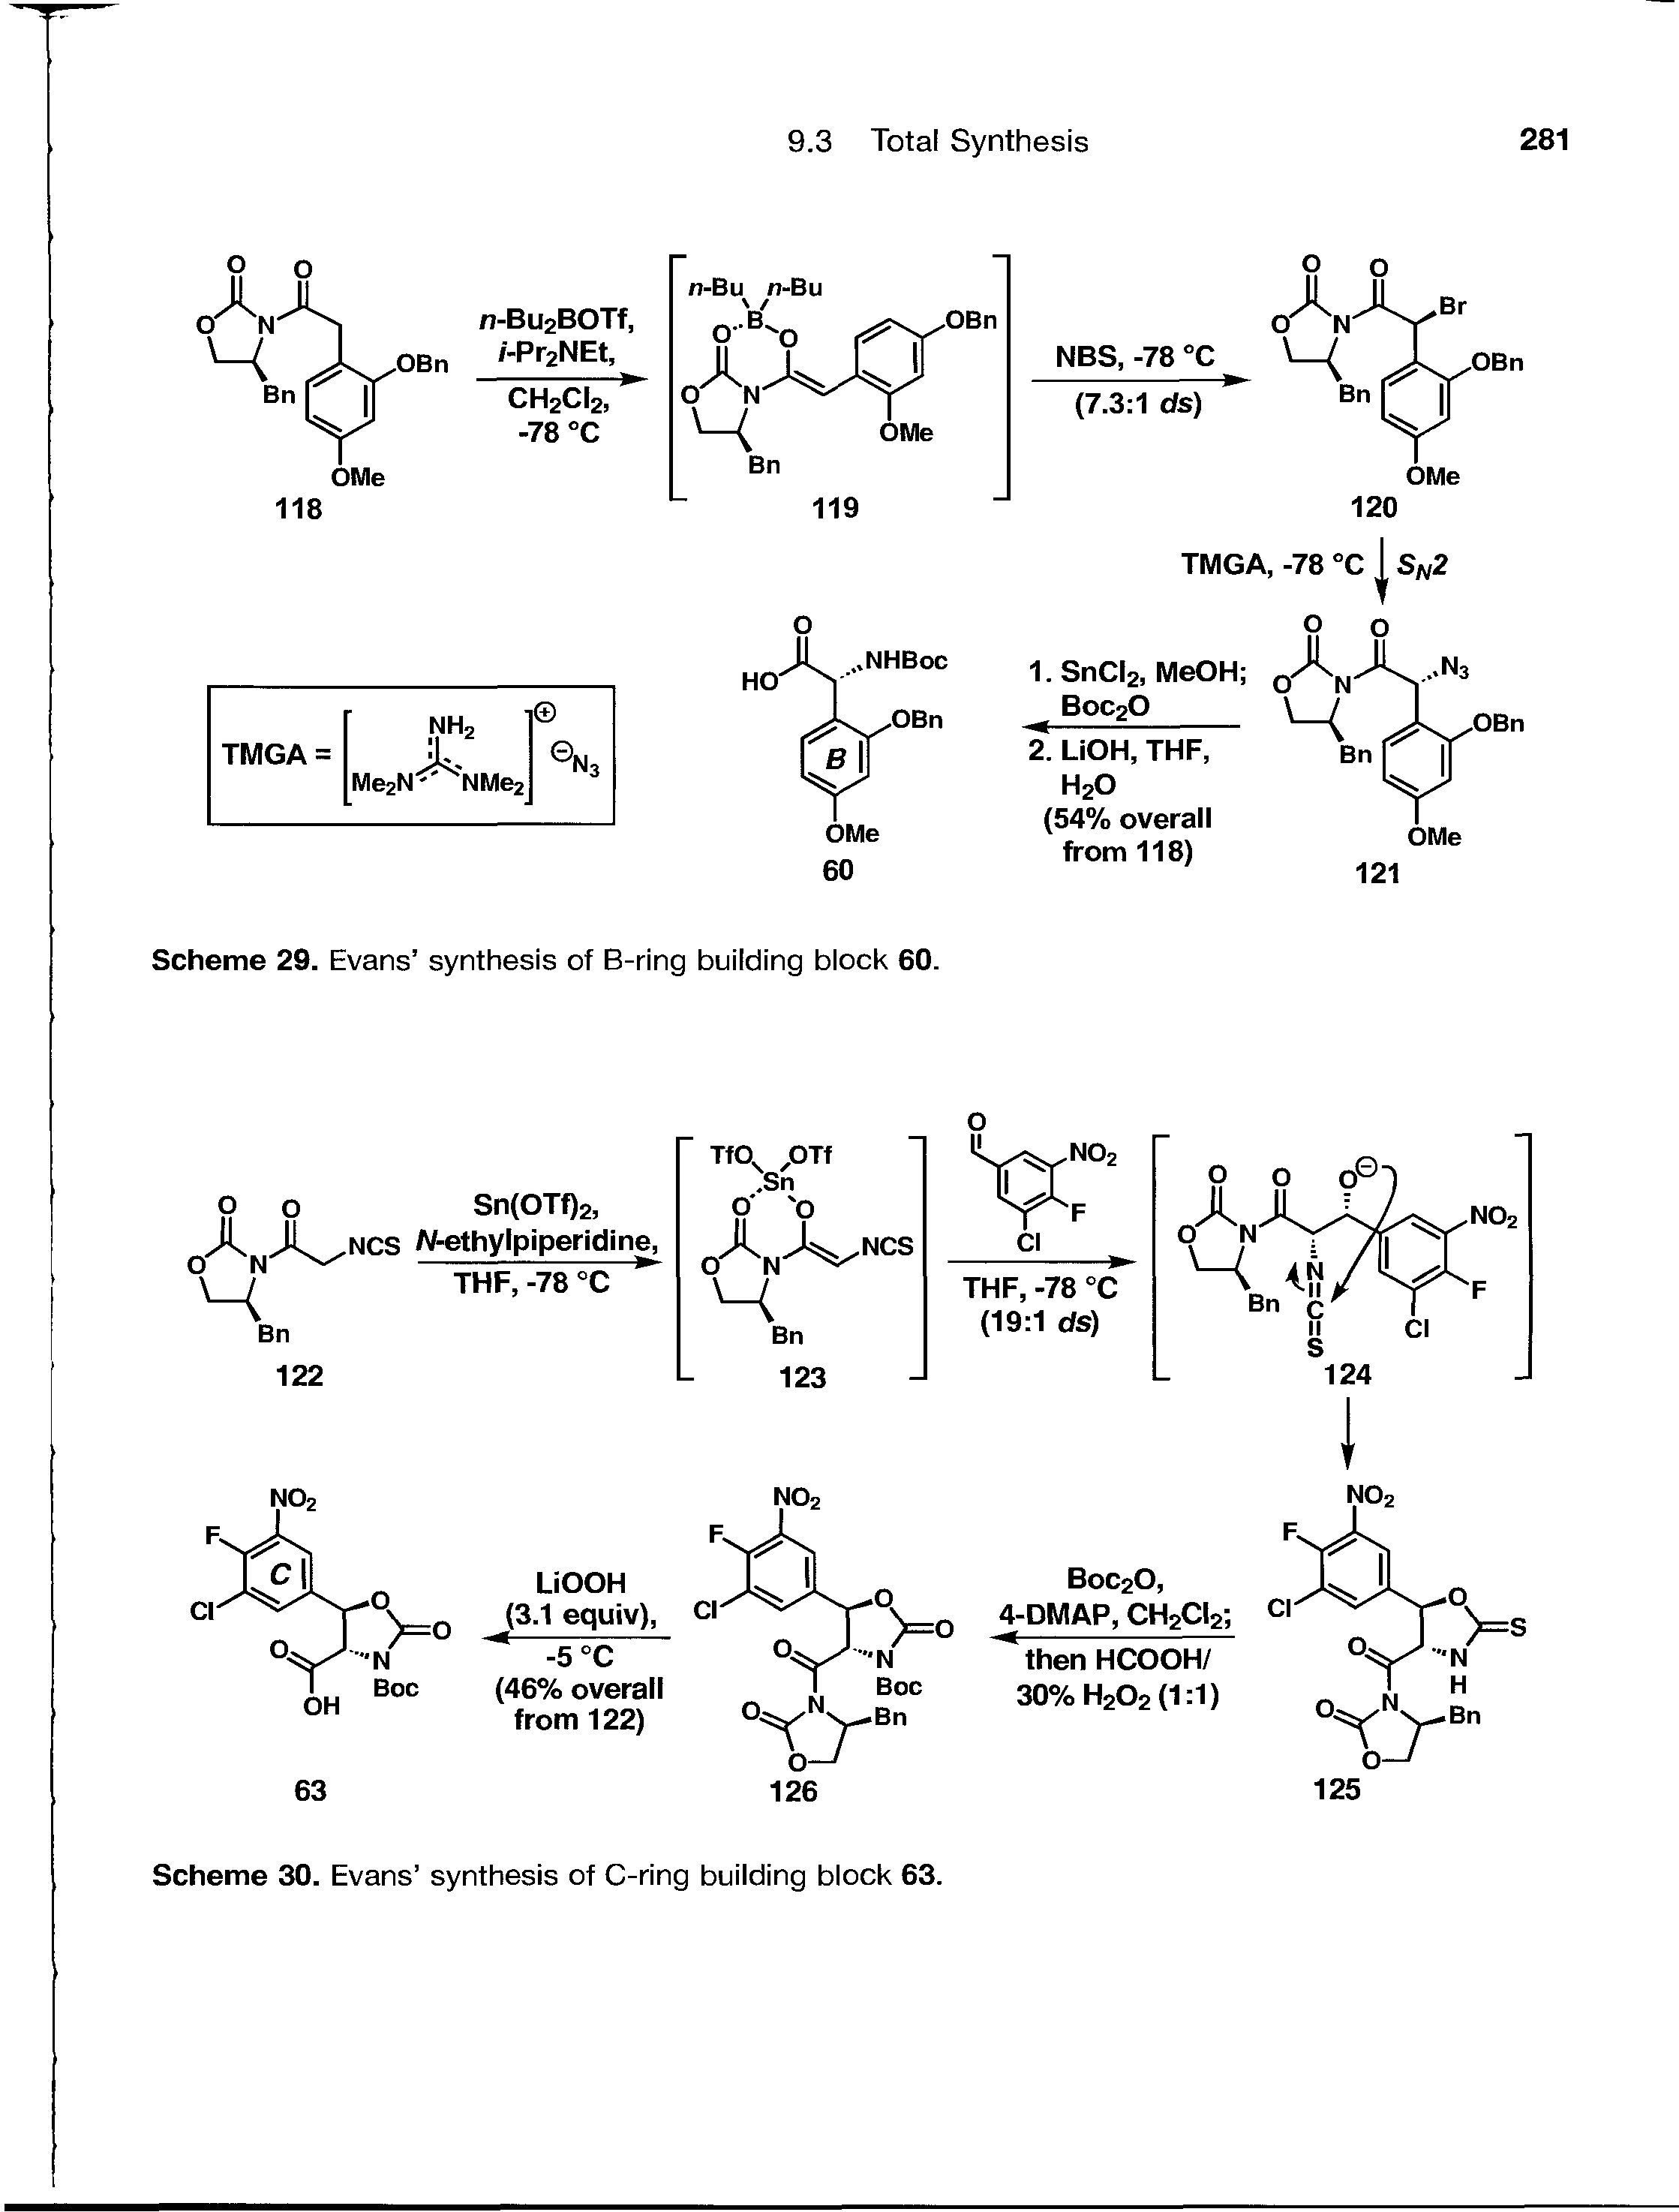 Scheme 30. Evans synthesis of C-ring building block 63.